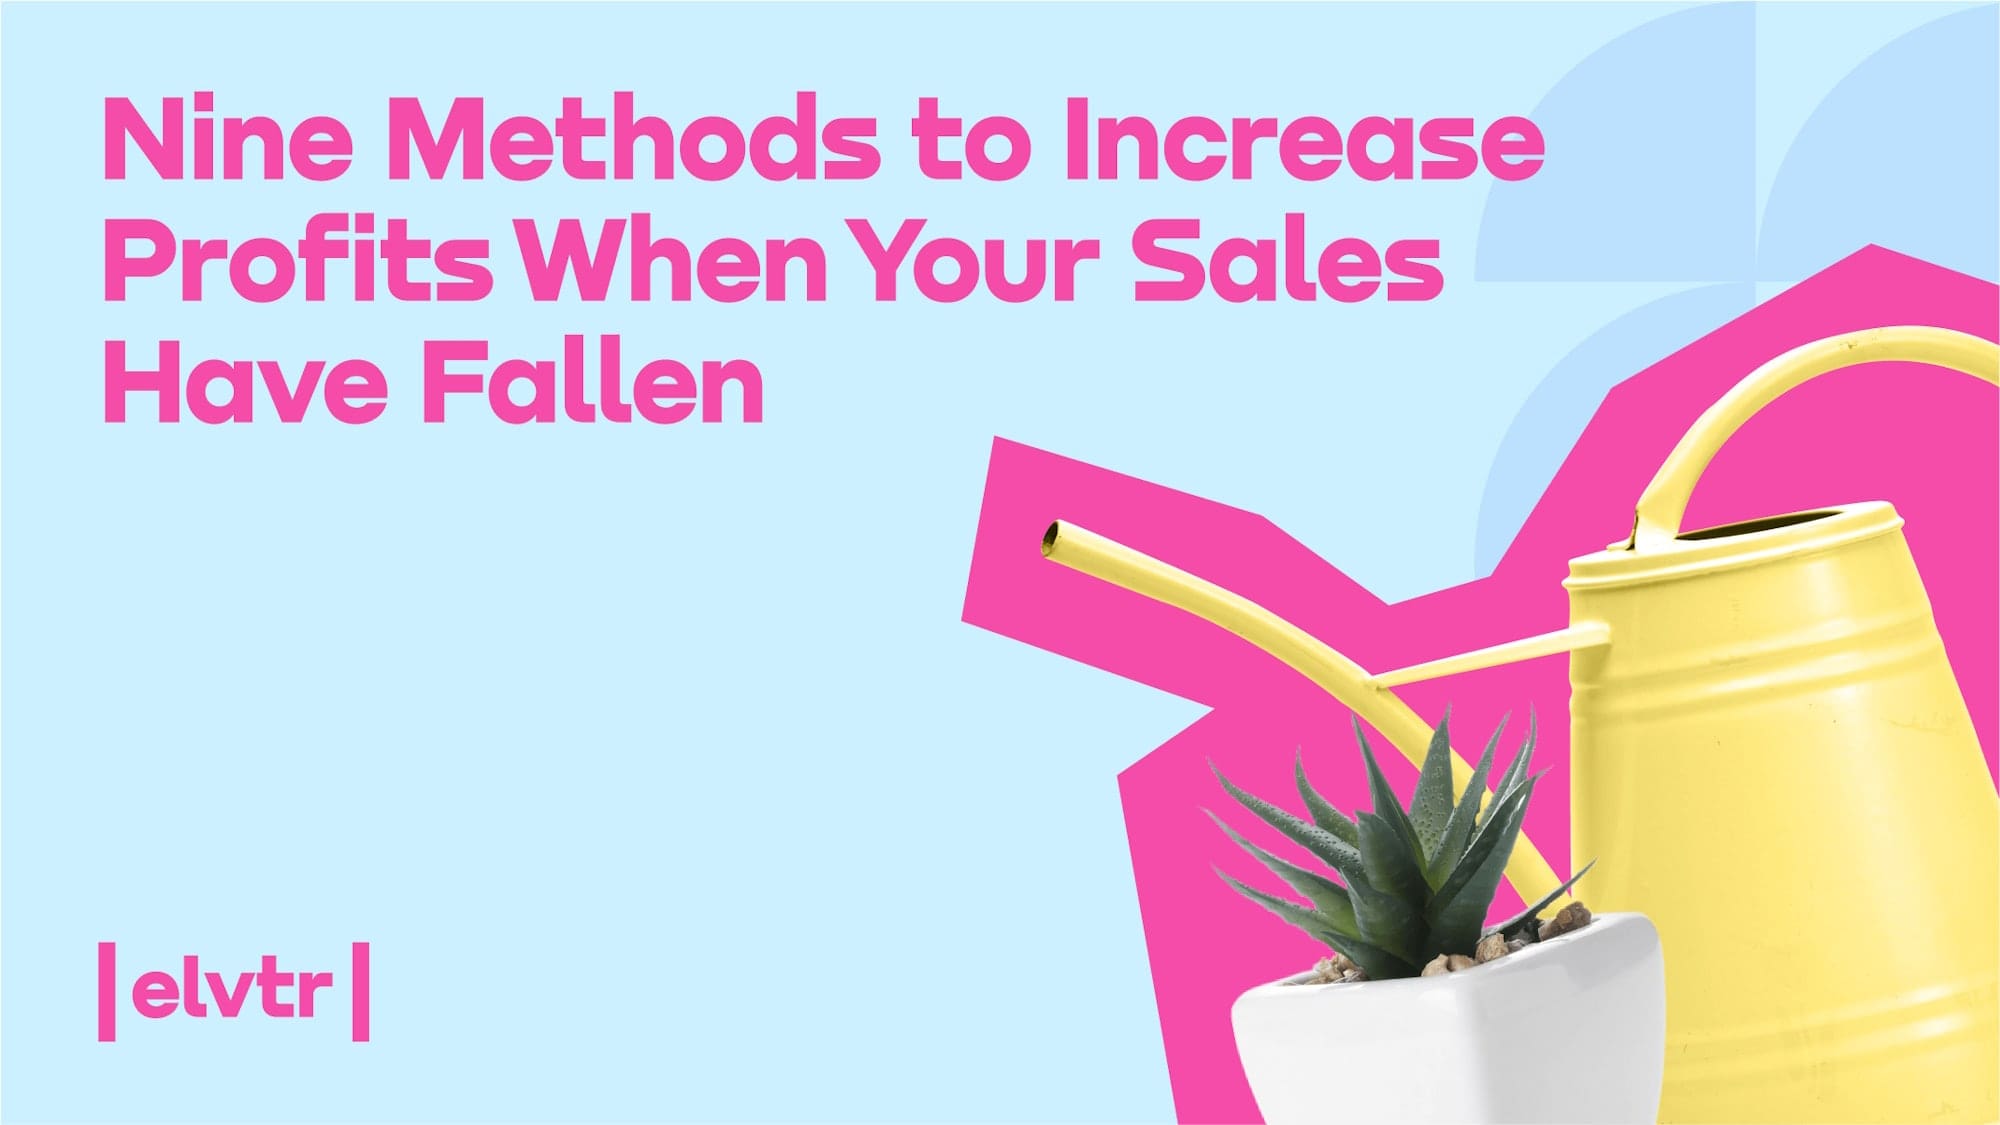 Nine Methods to Increase Profits When Your Sales Have Fallen image